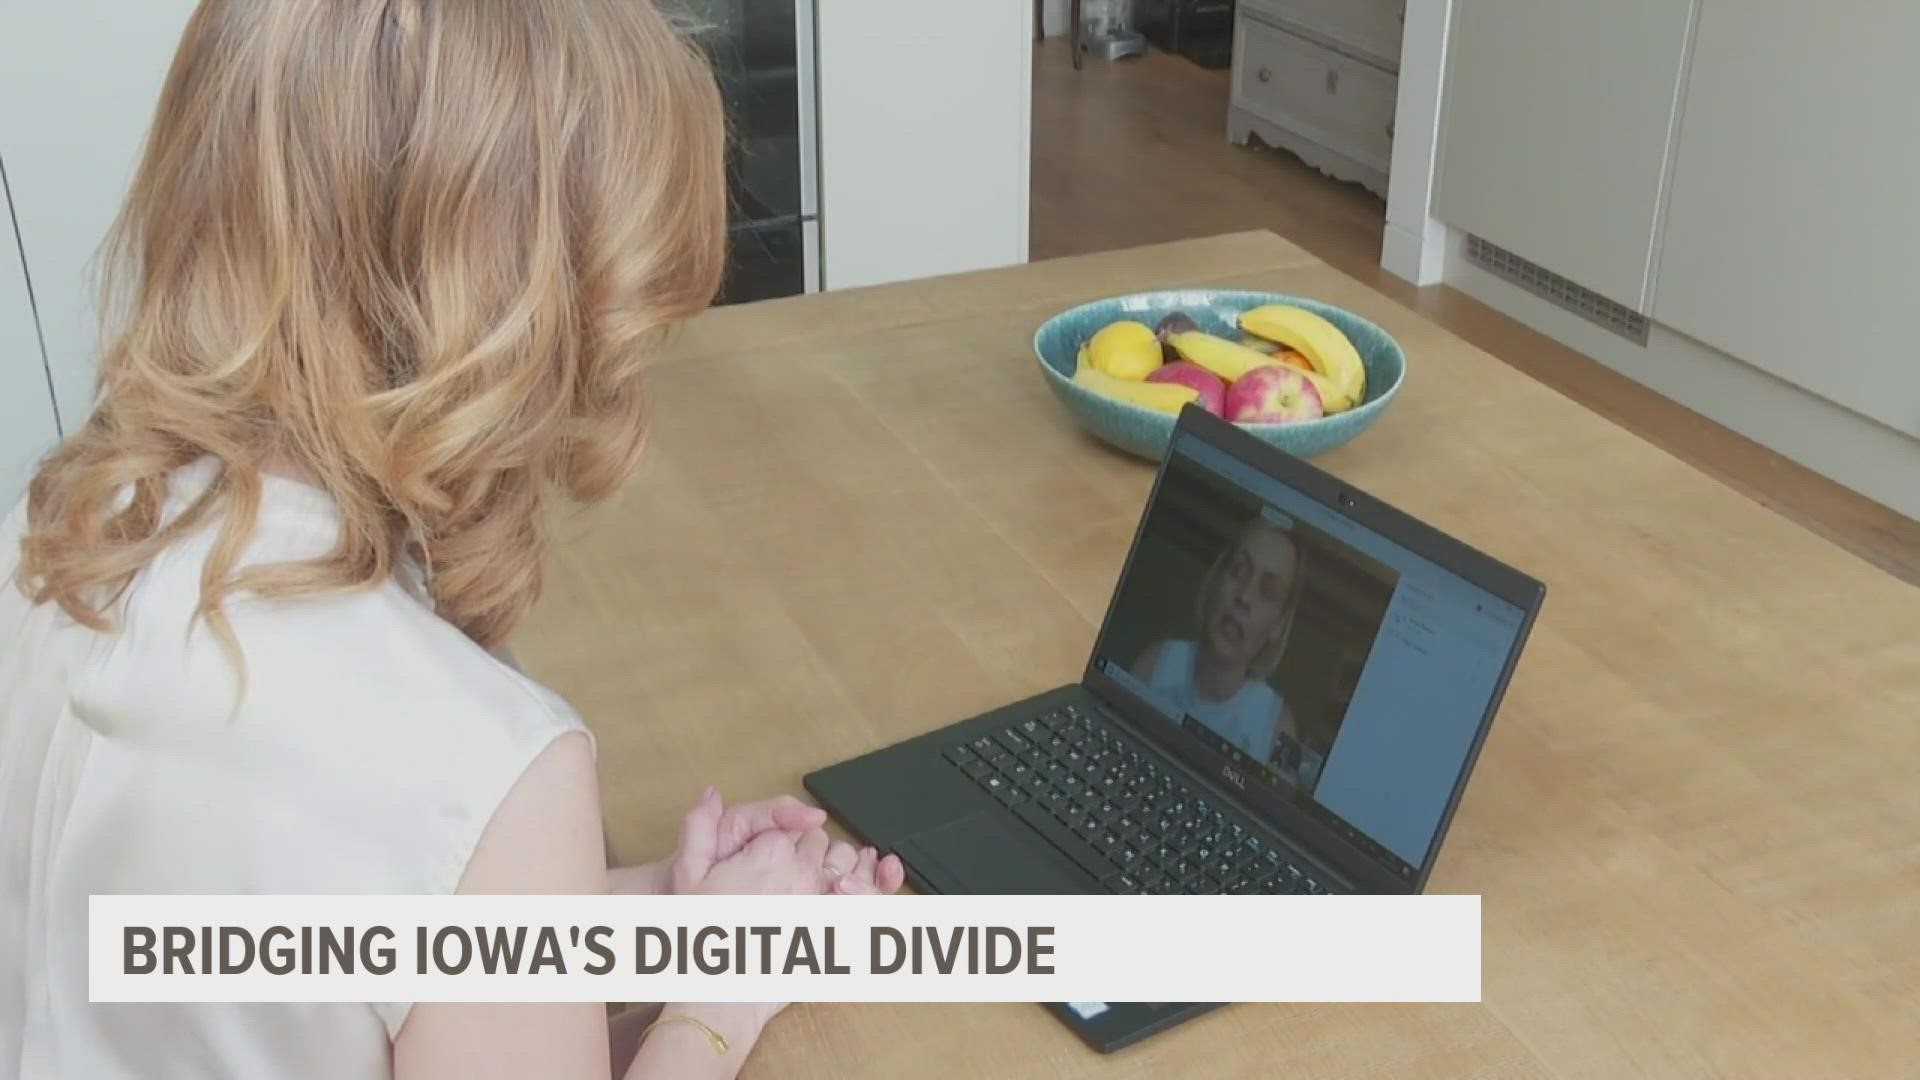 According to a study from the Greater Des Moines Partnership, 40% of Central Iowa homes are lacking high-speed broadband.